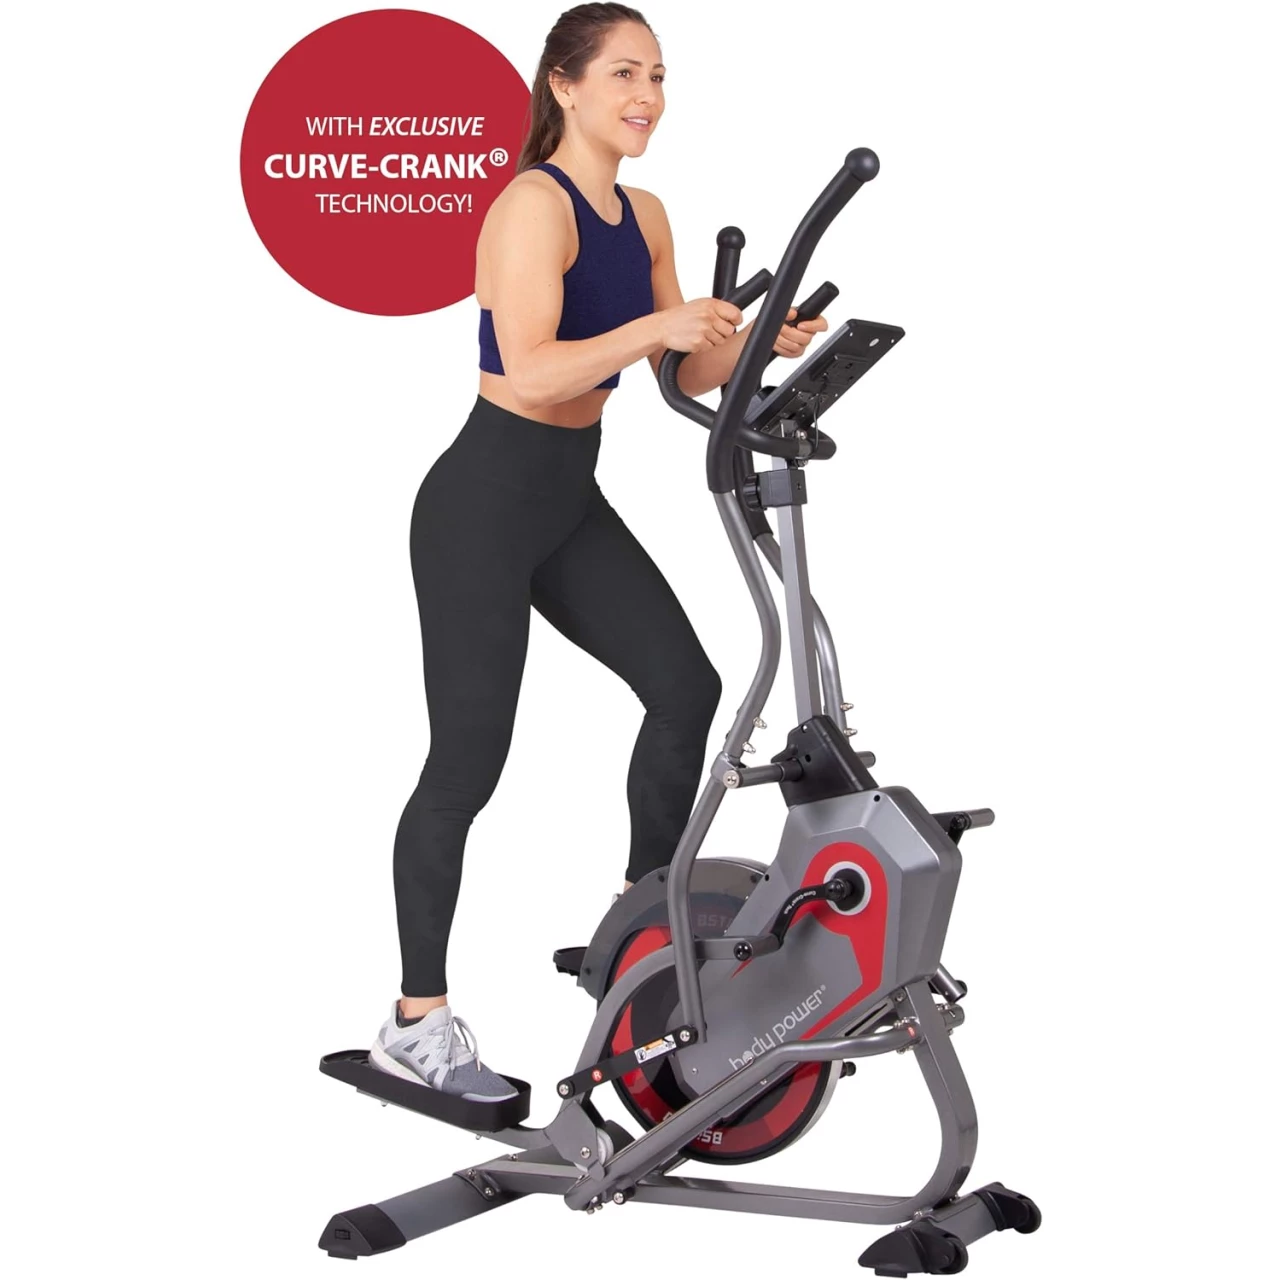 Elliptical Stepper Machine for Home. Patented 2-in-1 Stair Climber, Stepper, New Model, HIIT Training, Ergonomic, 1 Yr Warranty, Cardio, Resistance, 8 Levels, Digital, Compact, Safe, Body Power